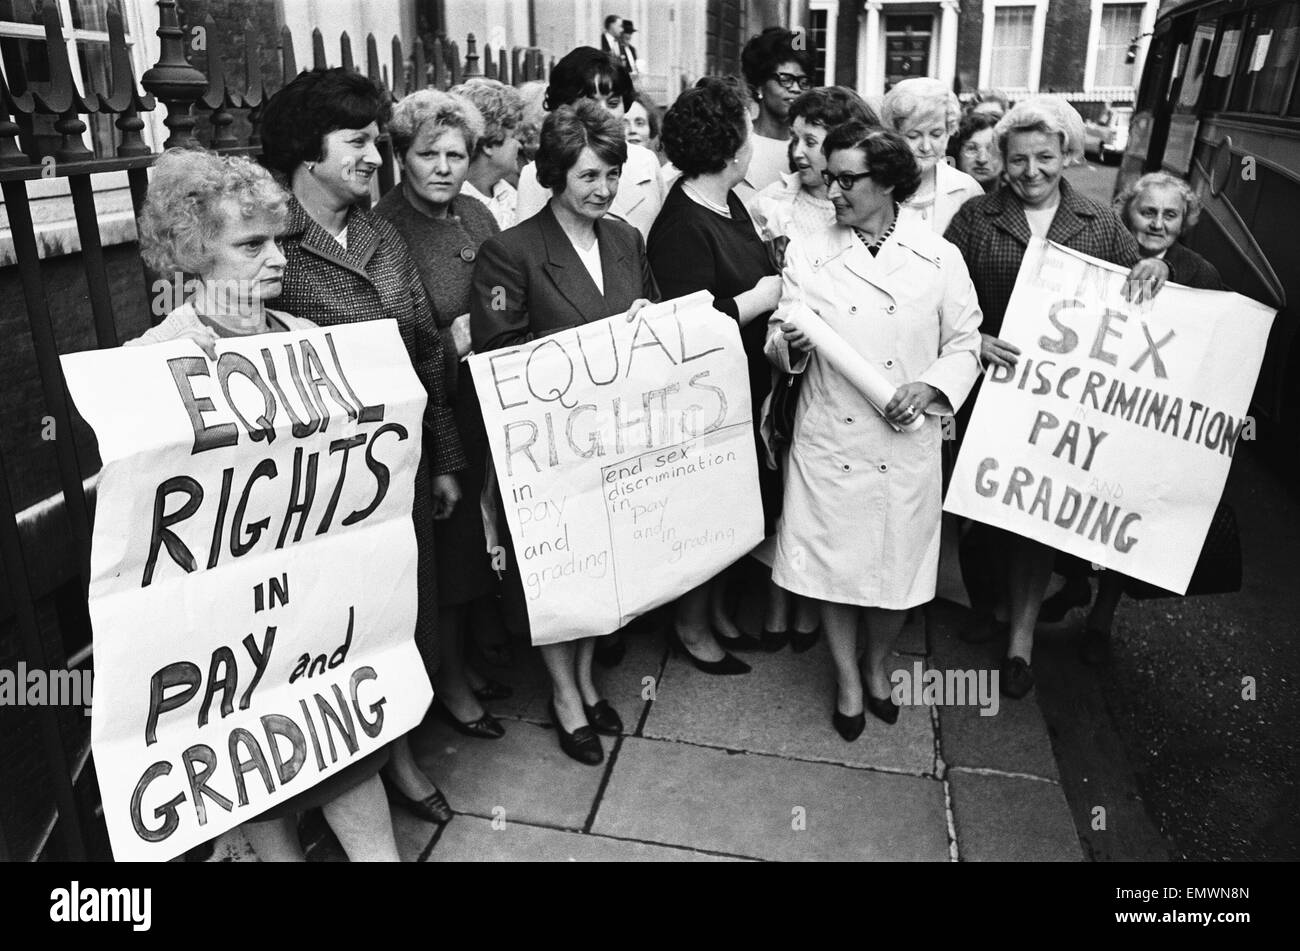 Women sewing machinists at the Ford Motor Company plant in Dagenham took strike action on 7 June, 1968 in support of a claim for regrading, parity with their male colleagues in the C pay grade and recognition of their skills. After strike action of three Stock Photo